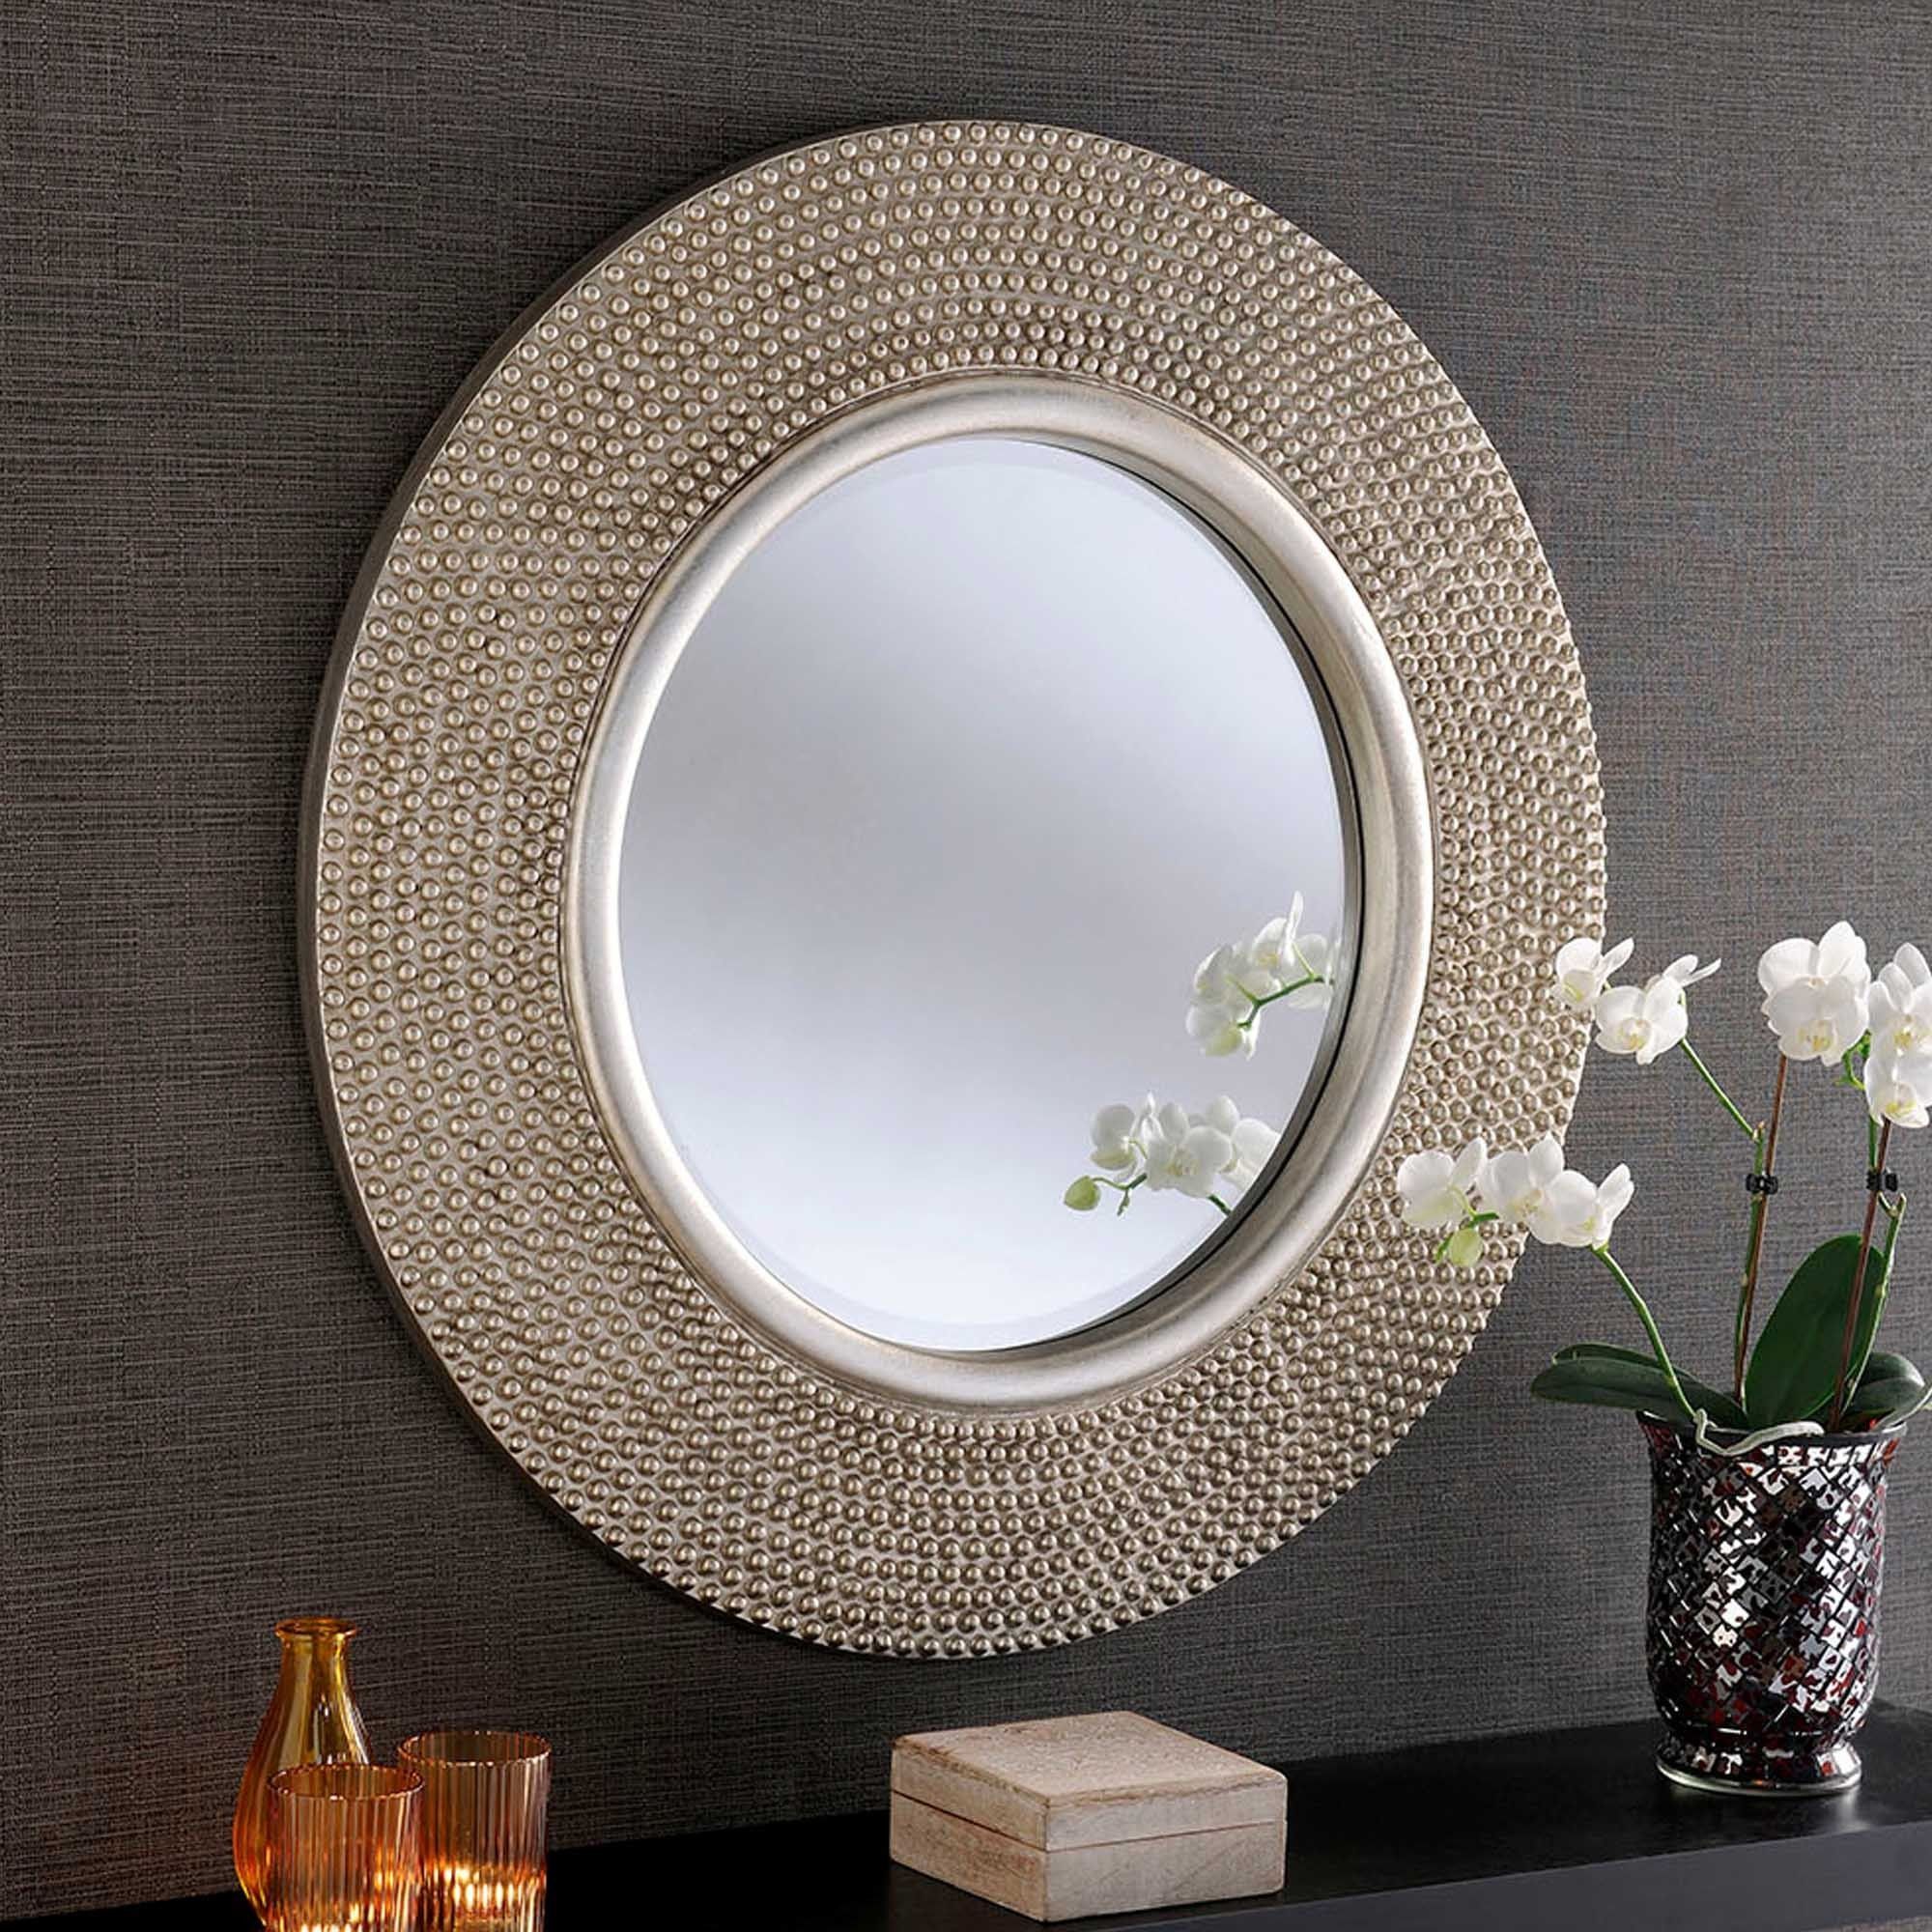 Circular Contemporary Silver Studded Wall Mirror | Wall Mirrors For Free Floating Printed Glass Round Wall Mirrors (View 11 of 15)